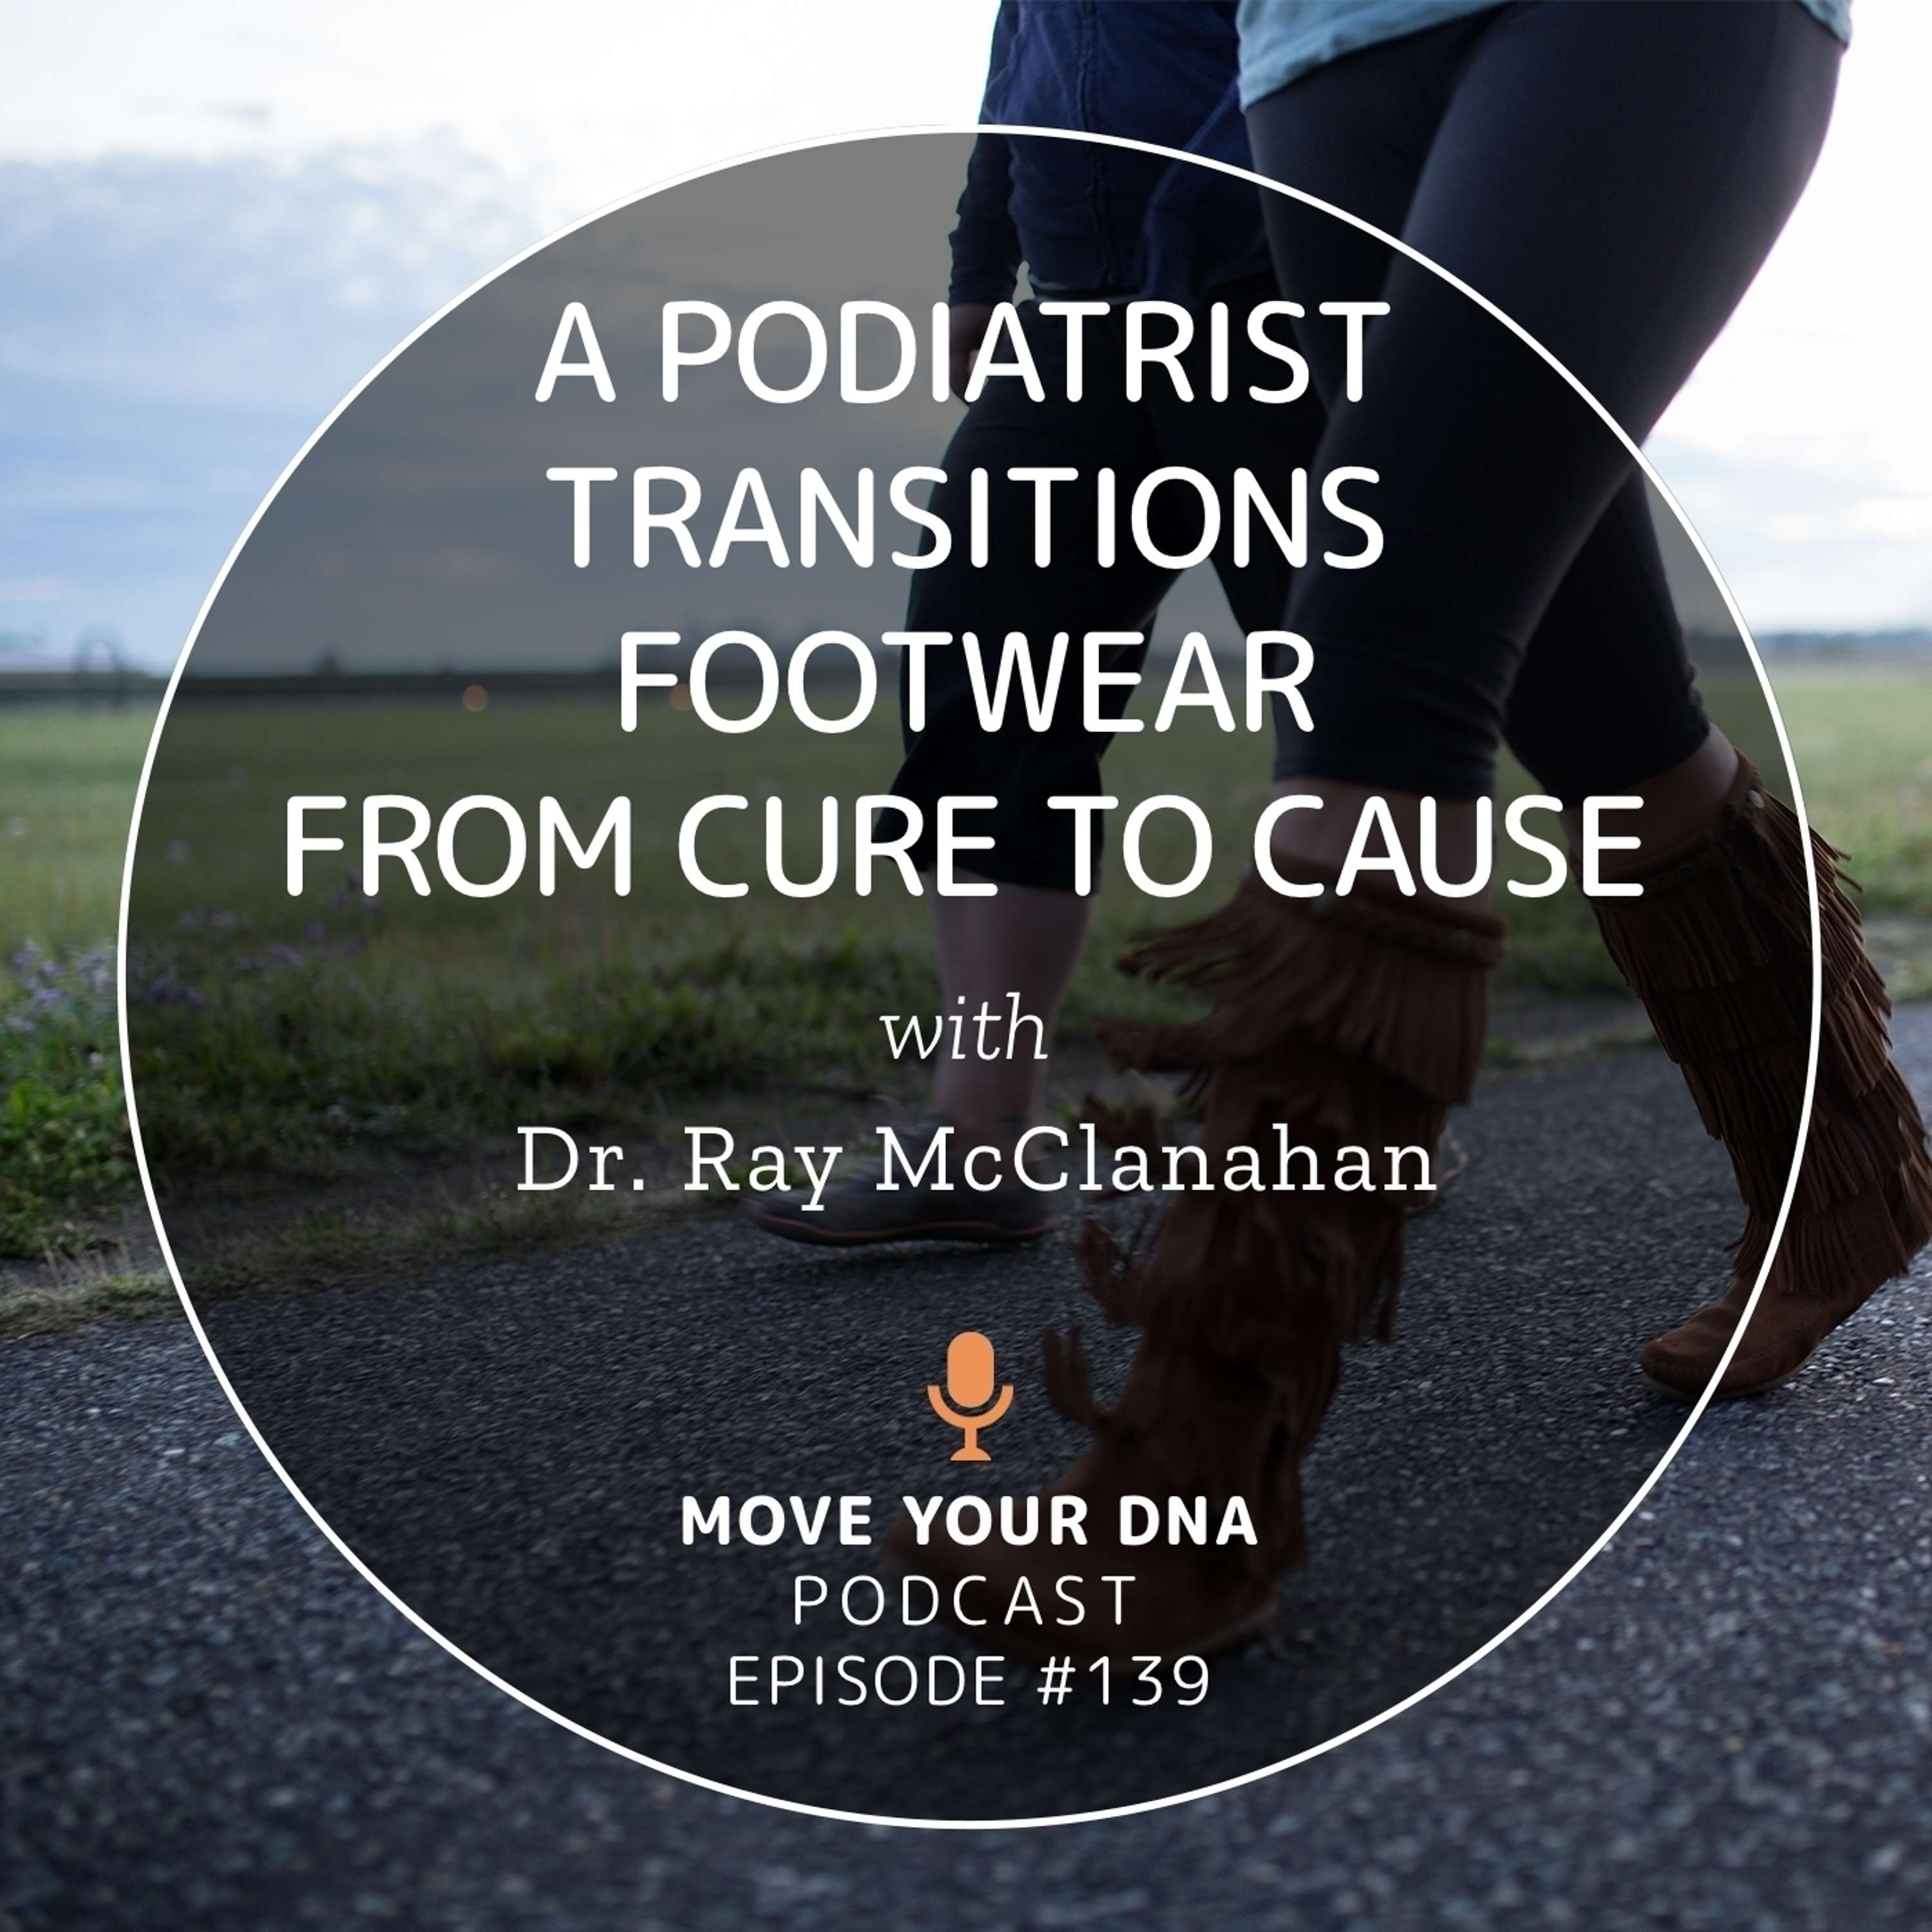 Ep 139: A Podiatrist Transitions Footwear from Cure to Cause